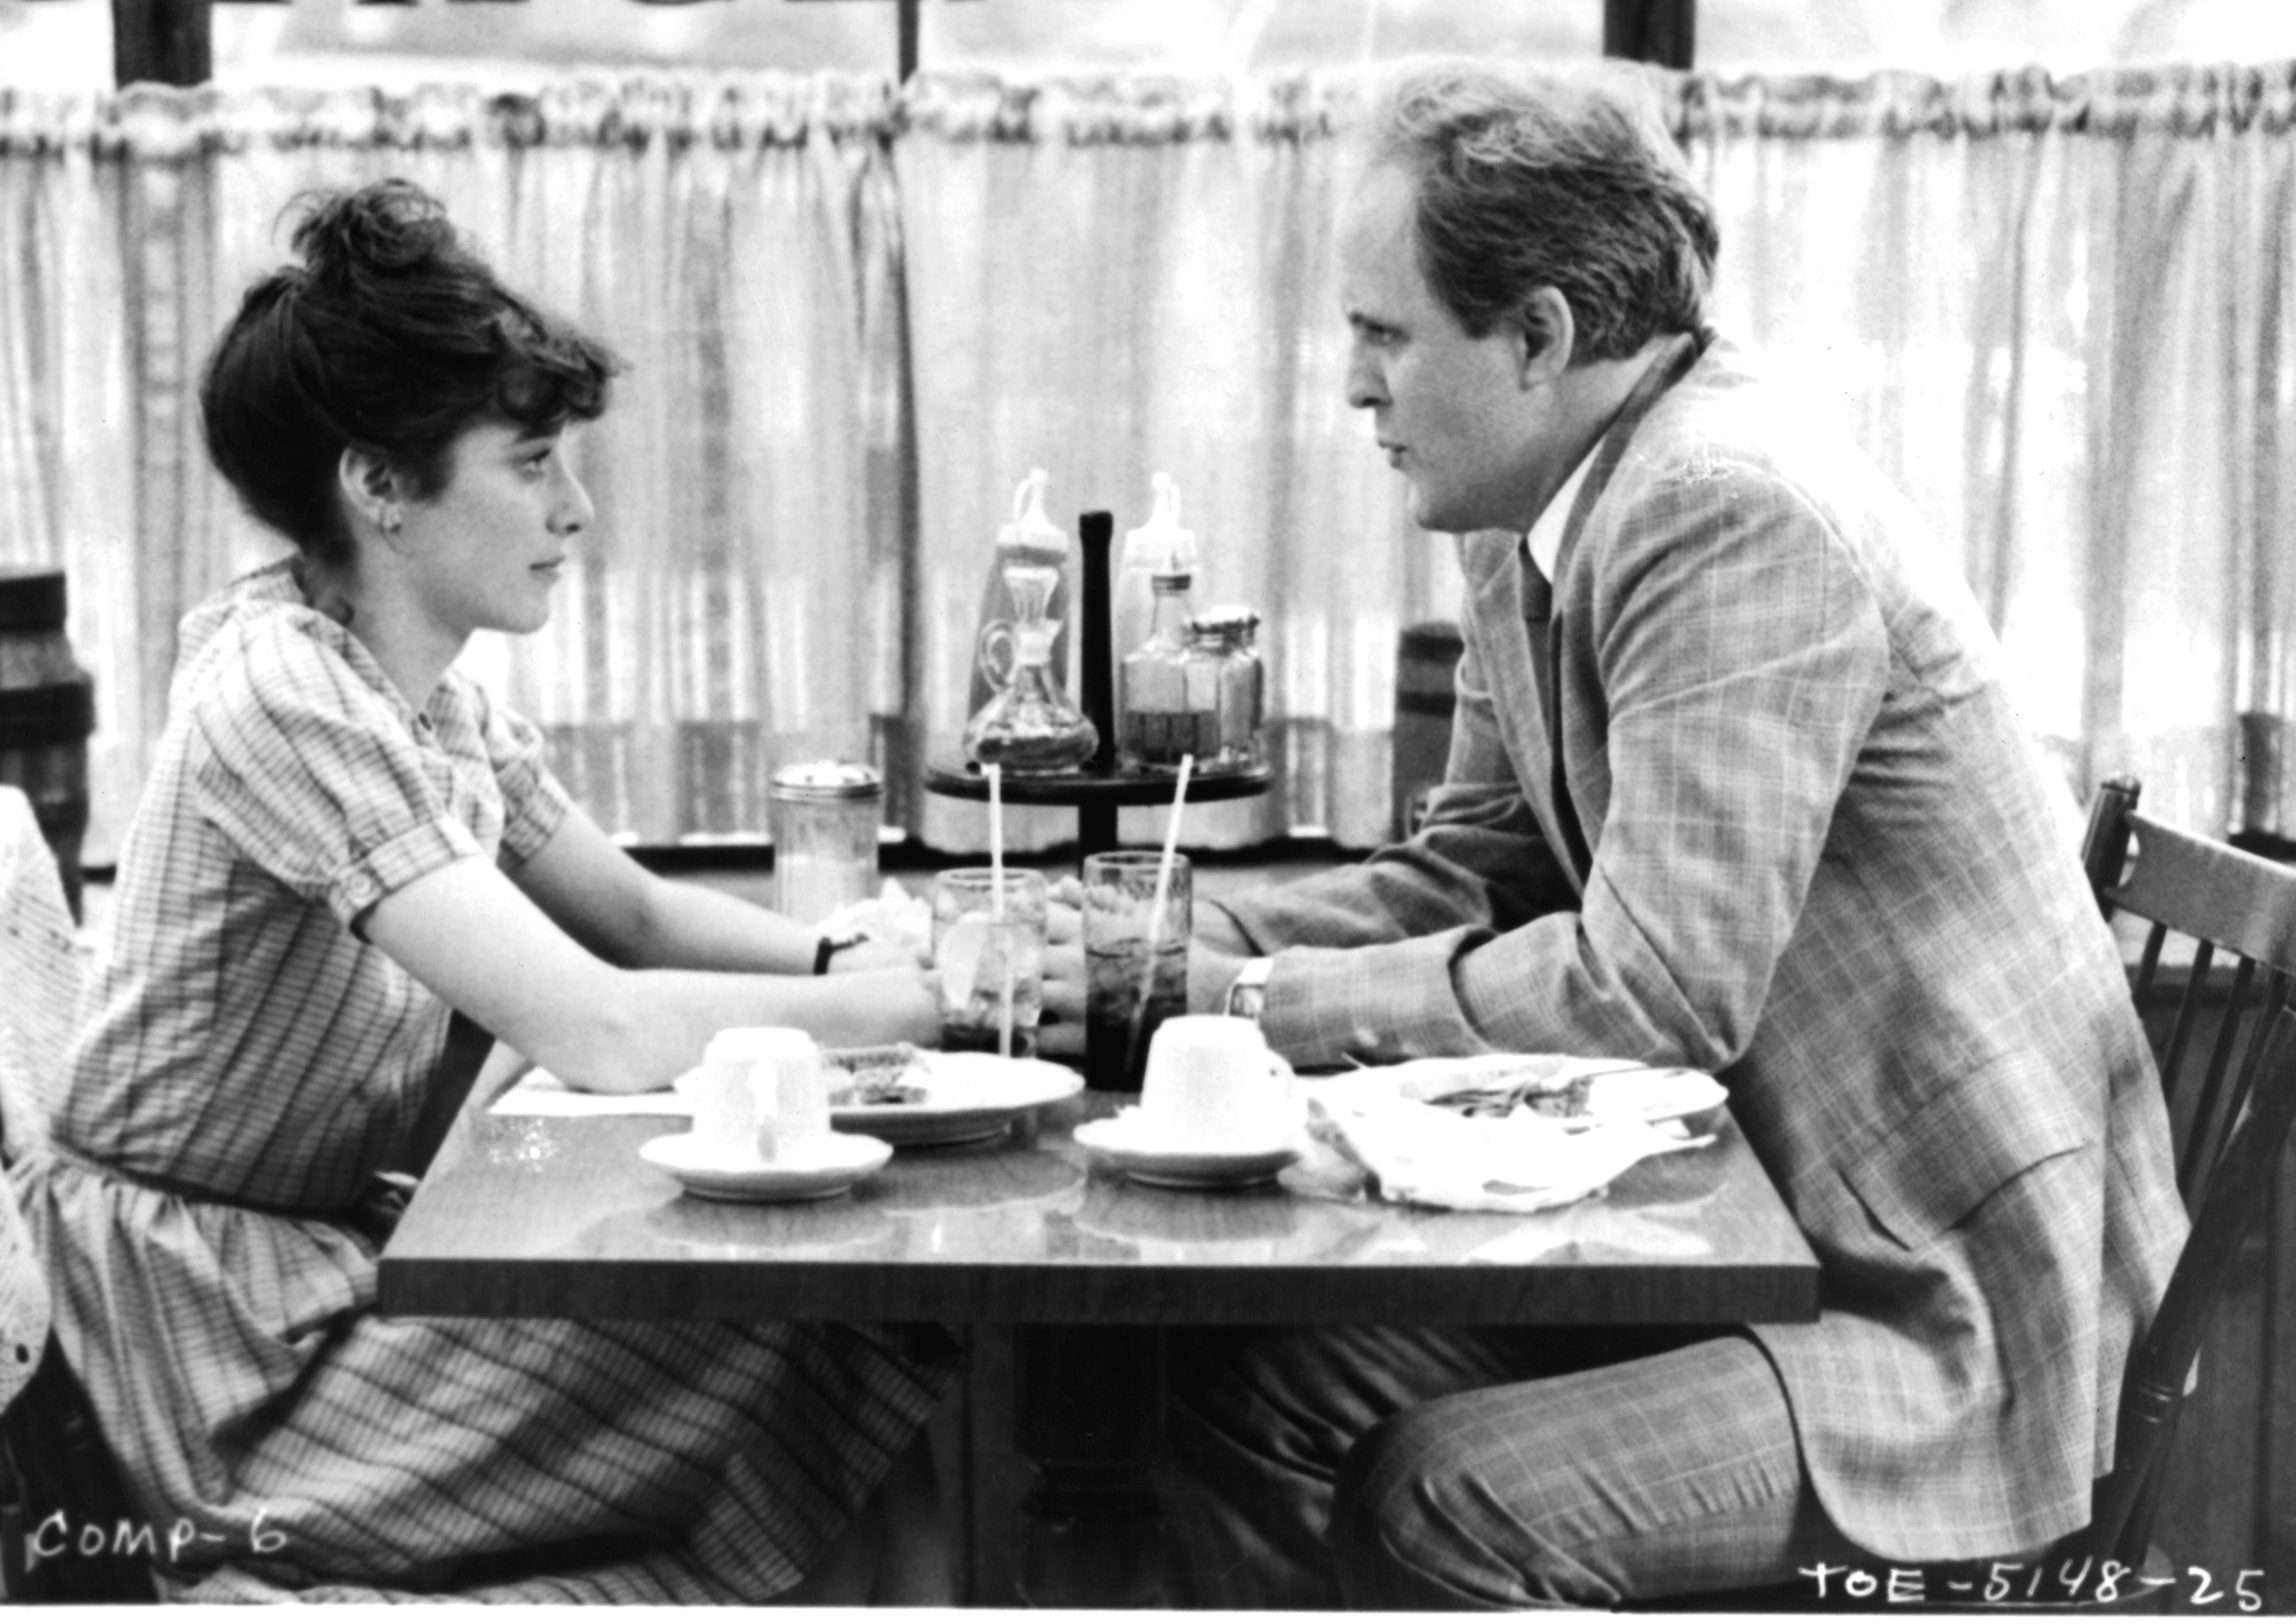 Still of Debra Winger and John Lithgow in Terms of Endearment (1983)